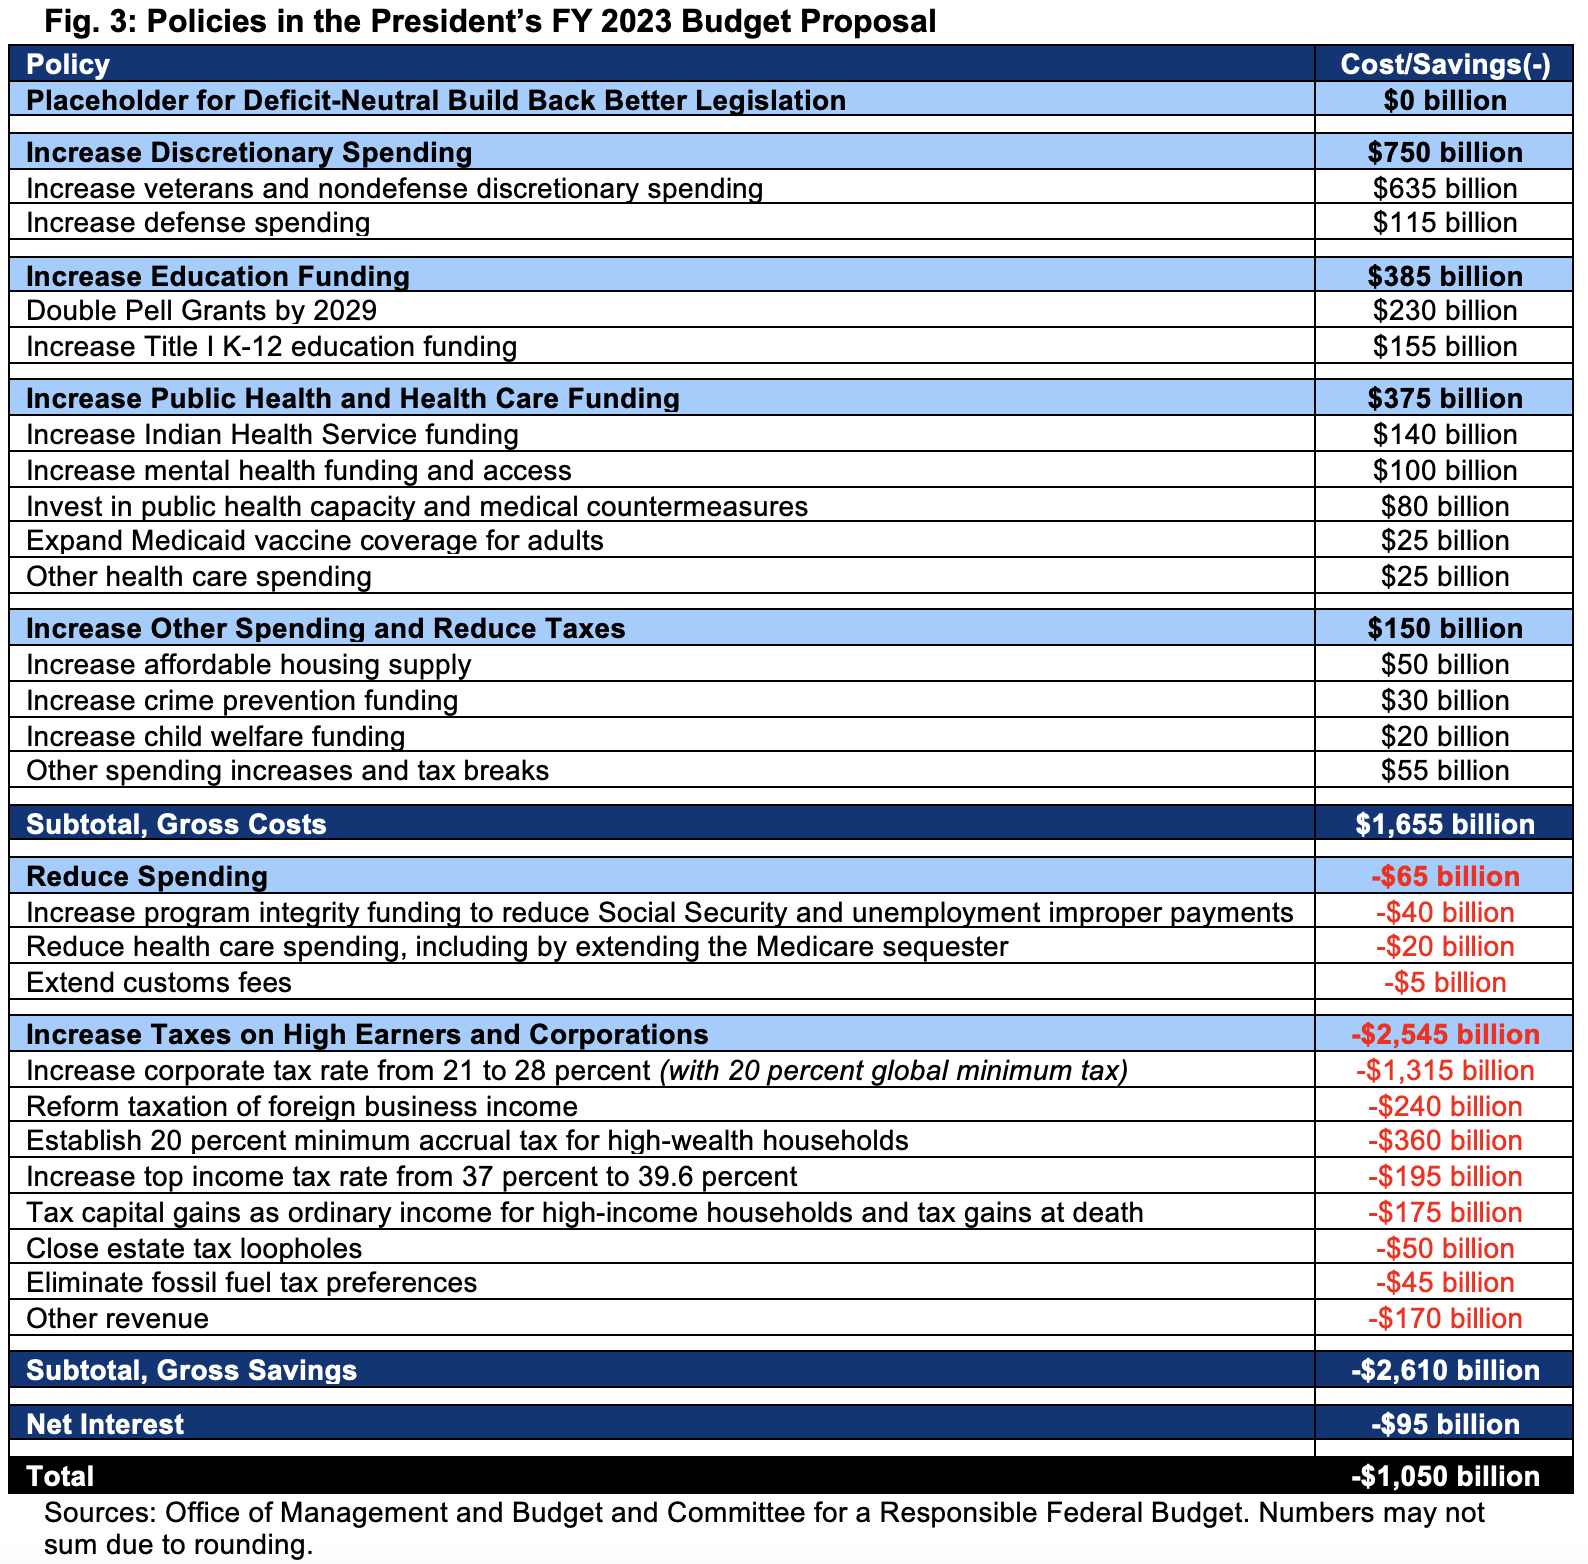 Policies in the President's FY 2023 Budget Proposal